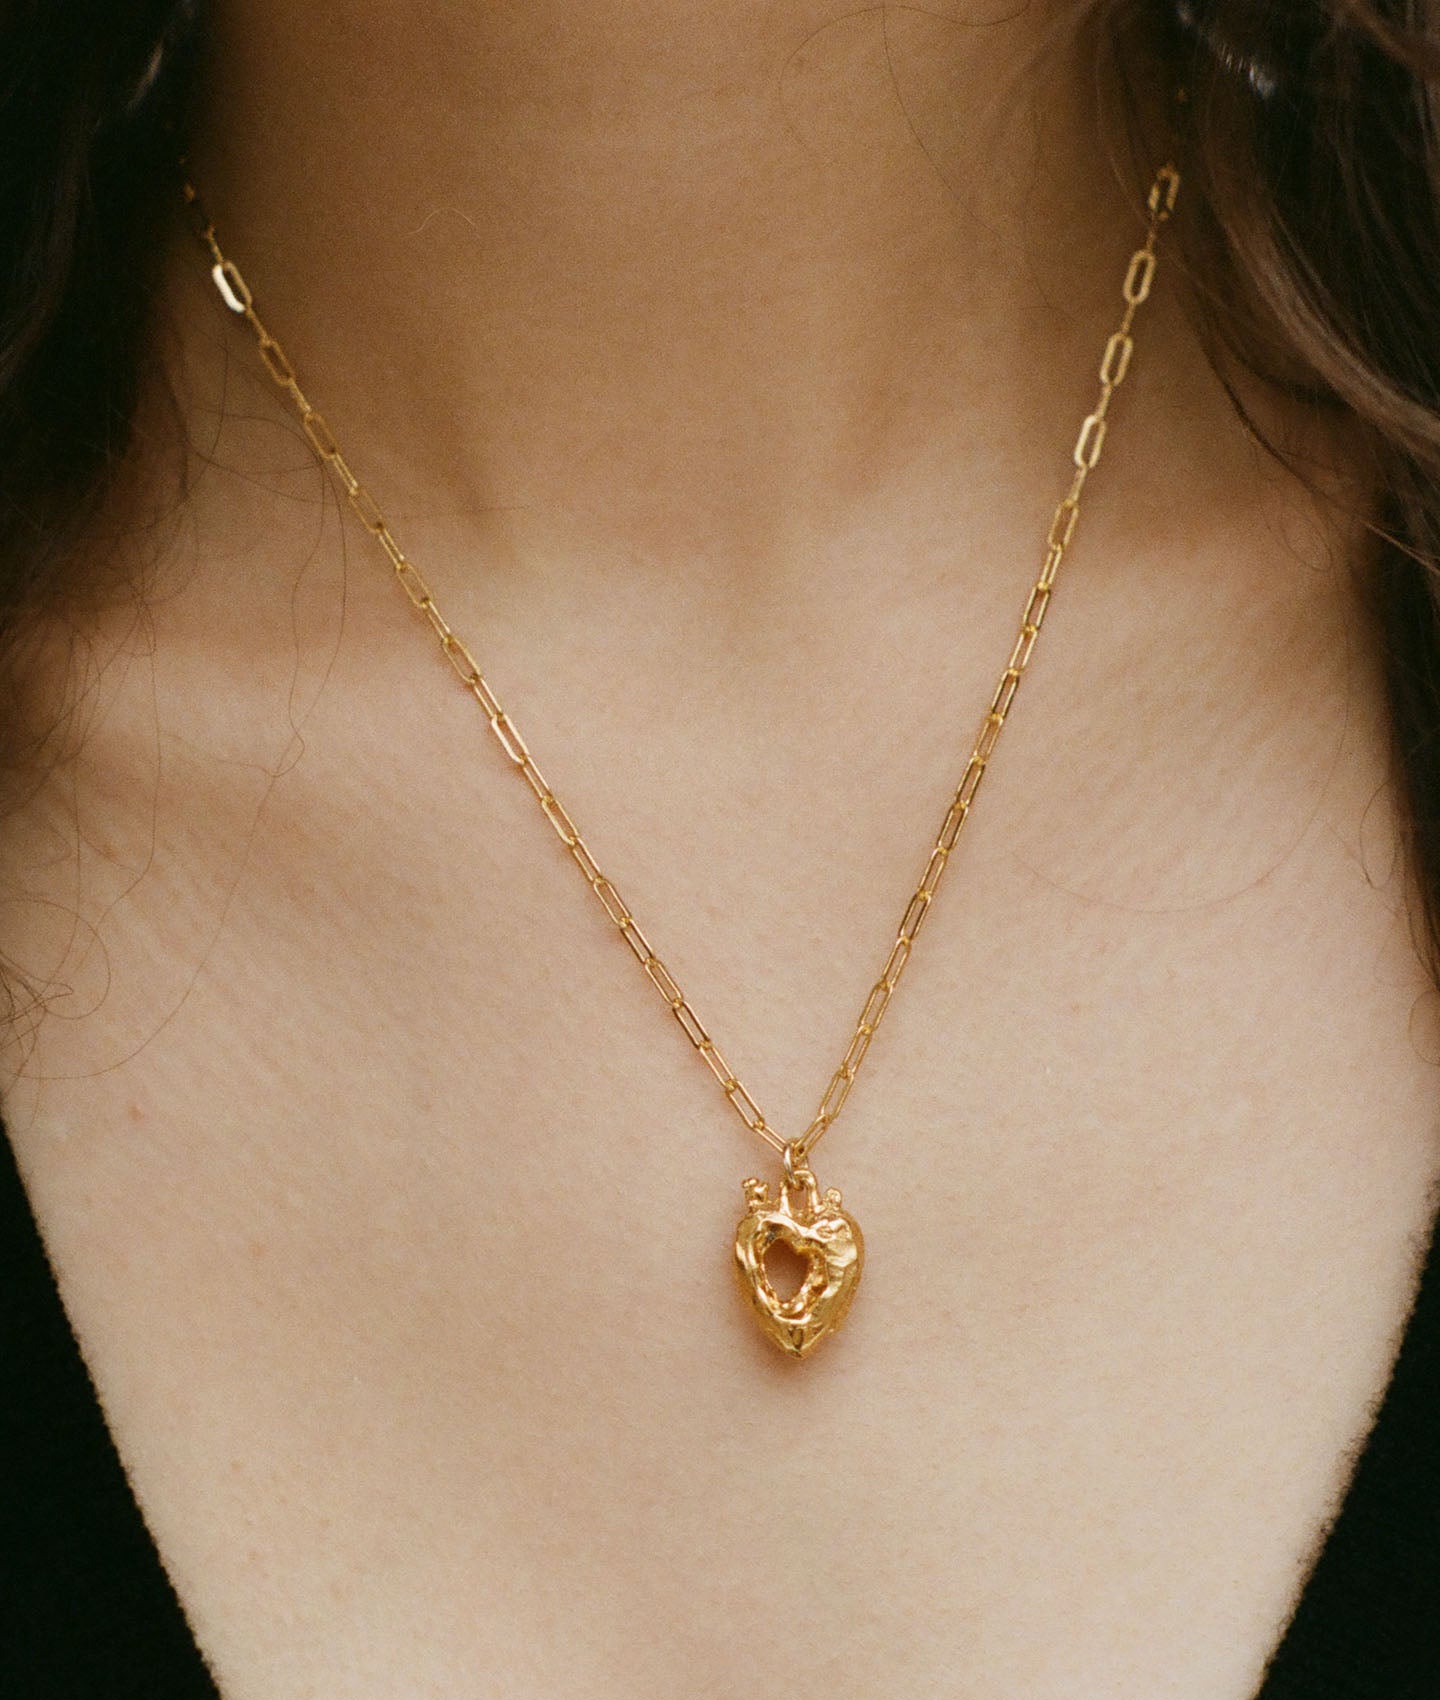 The Lovers' Pact Necklace